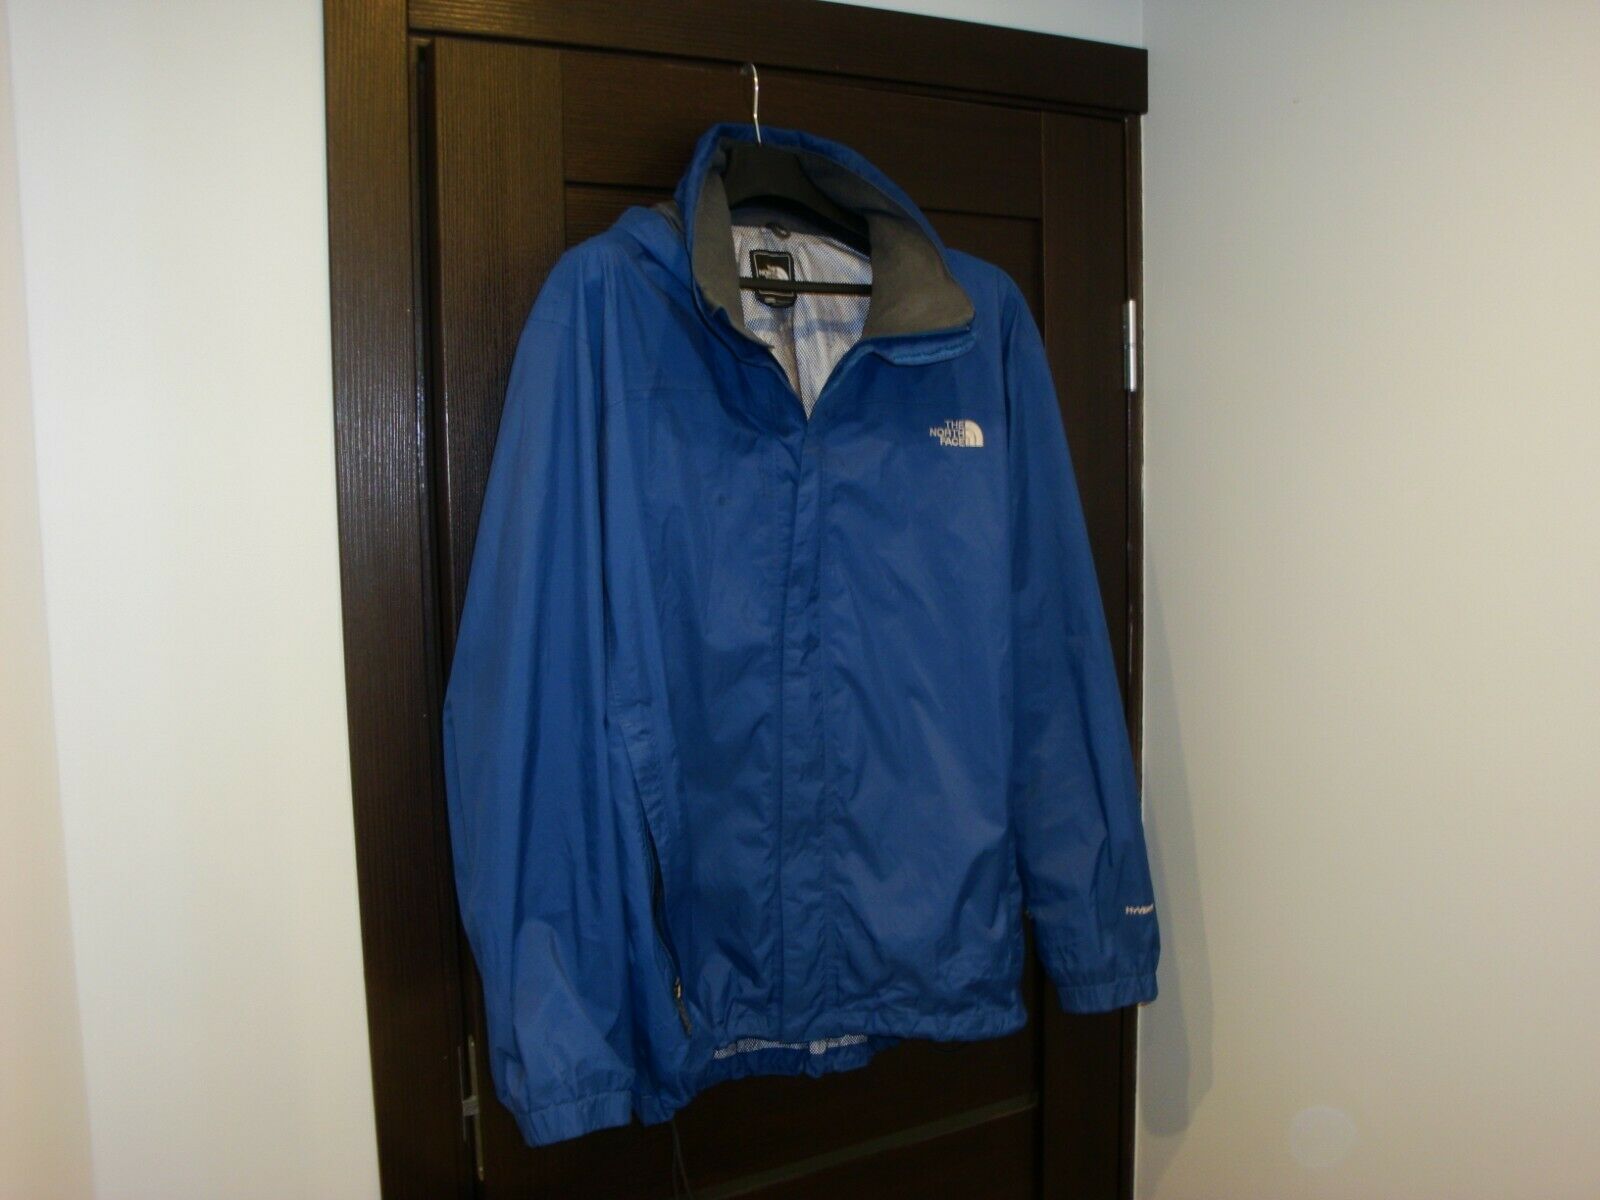 The North Face Mens Jacket HyVent Big Size 3XL XXXL Genuine With Hologram - $73.52